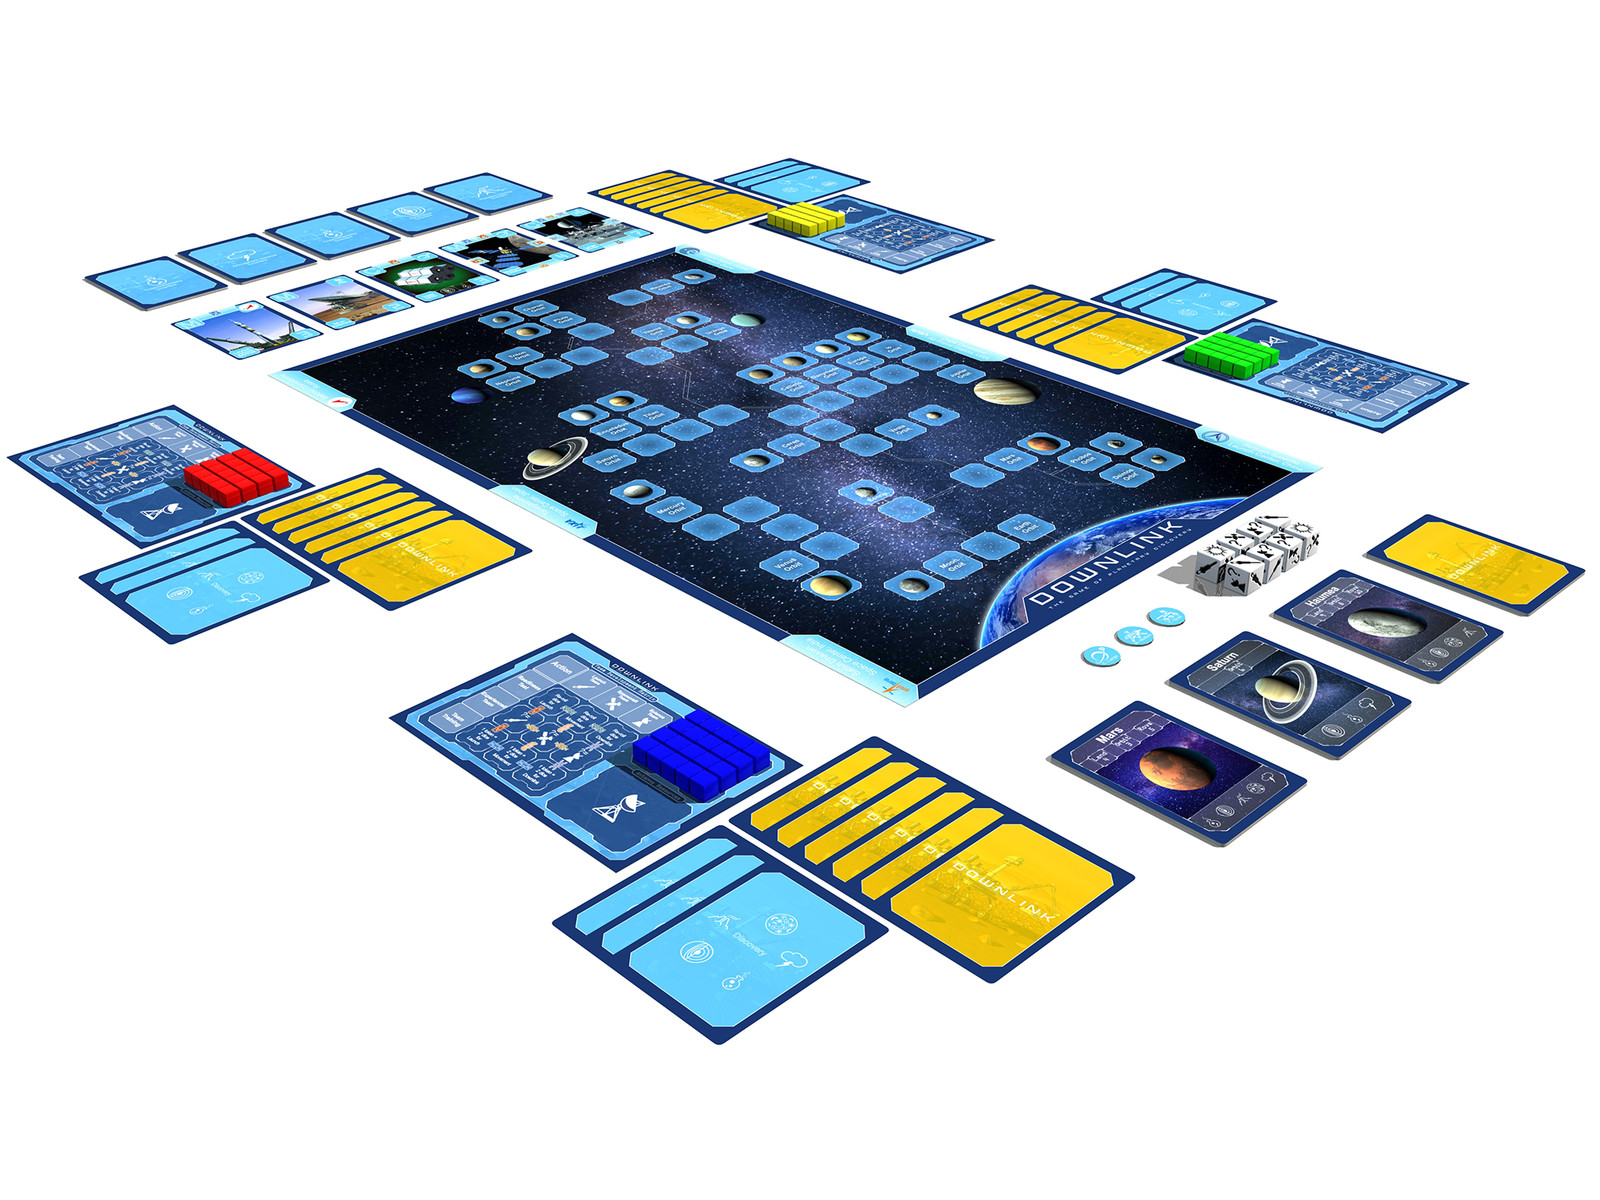 Kickstarter graphic showing the setup of the game.